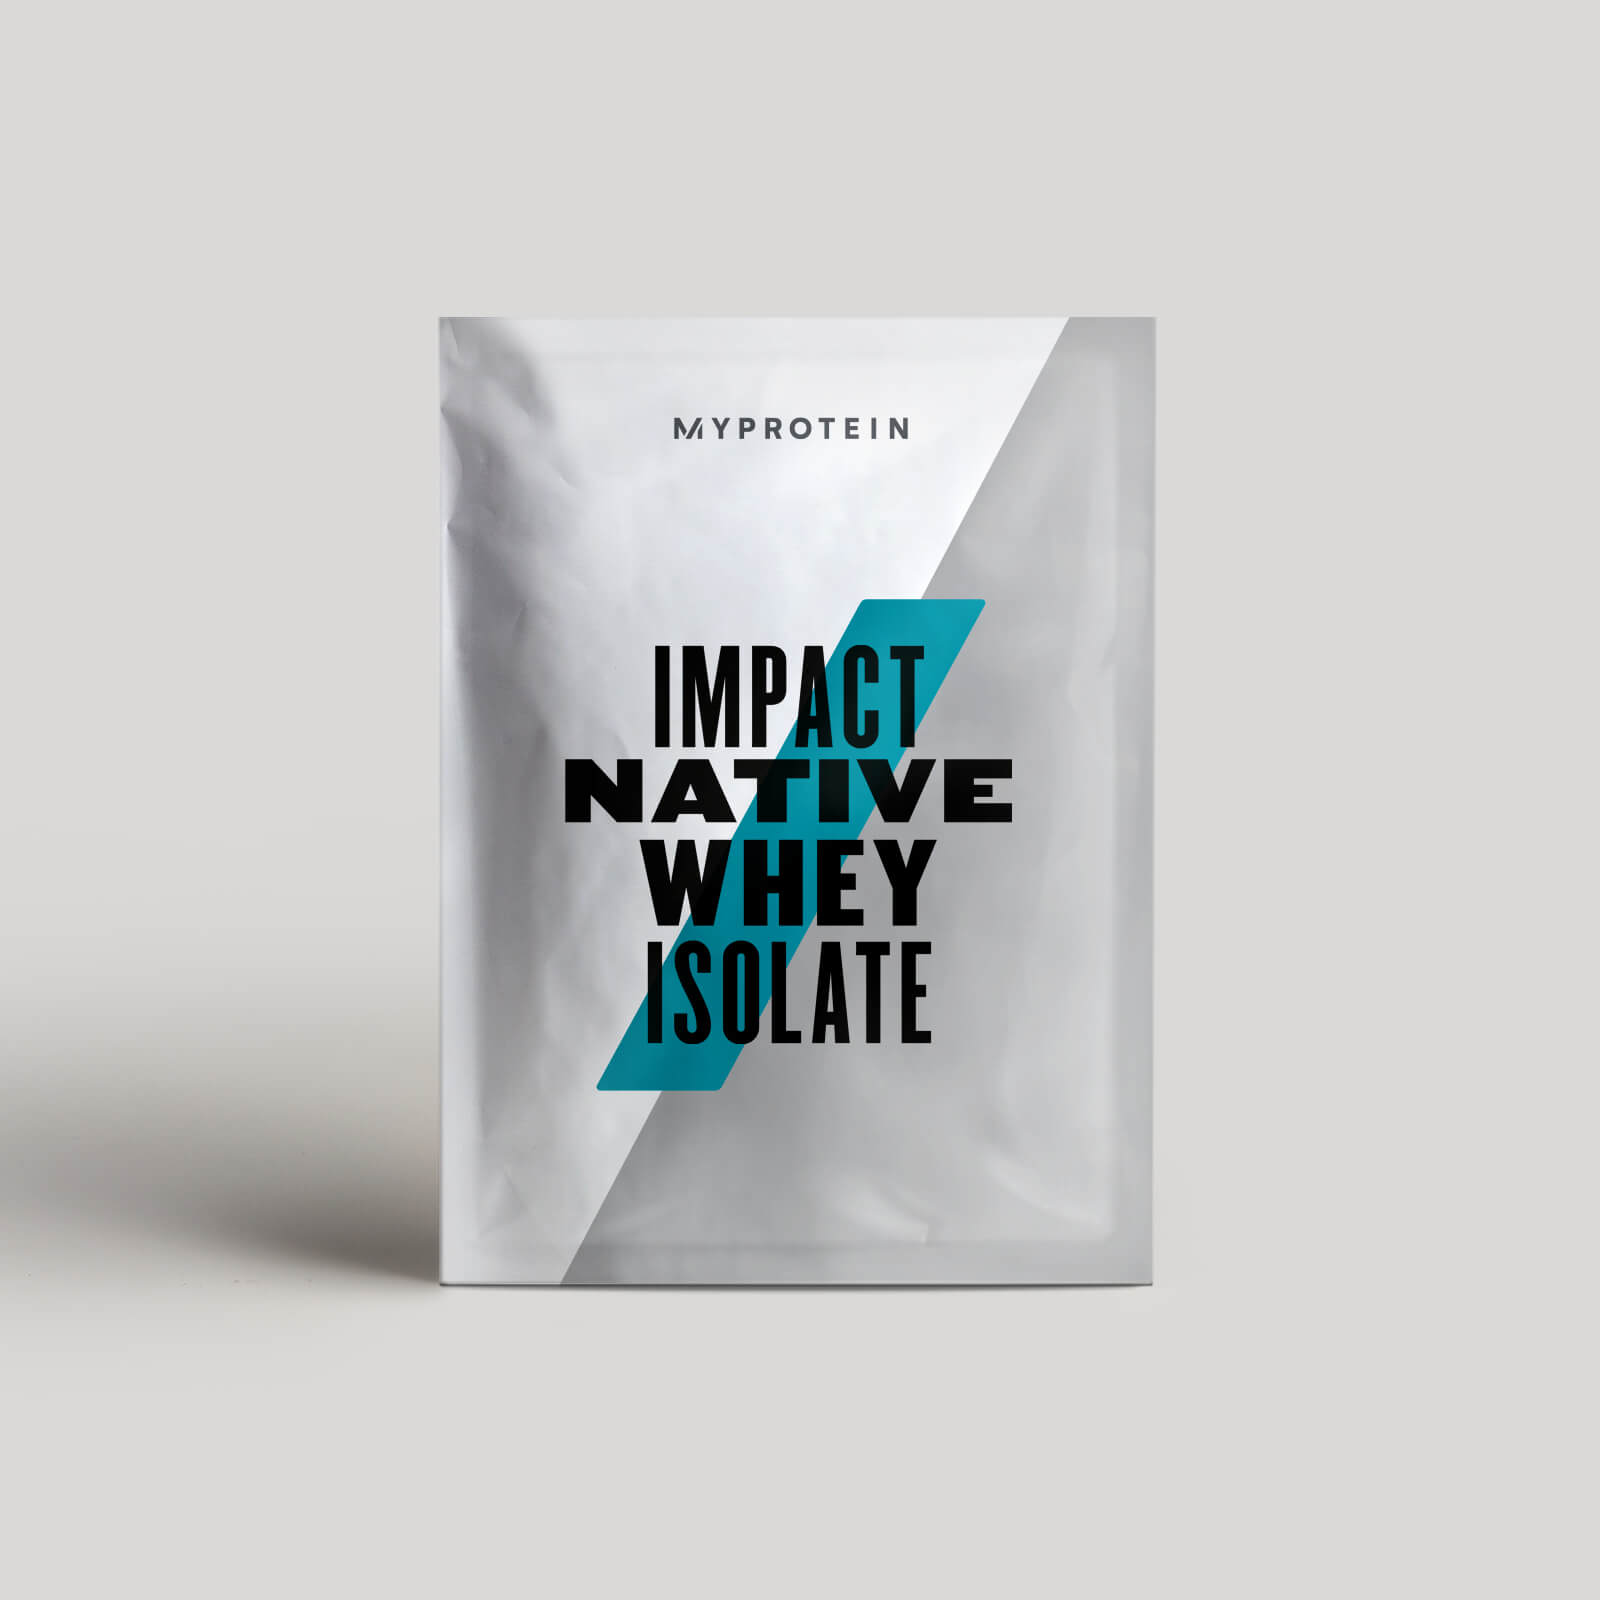 Myprotein Impact Native Whey Isolate (Sample) - 25g - Натурална ягода